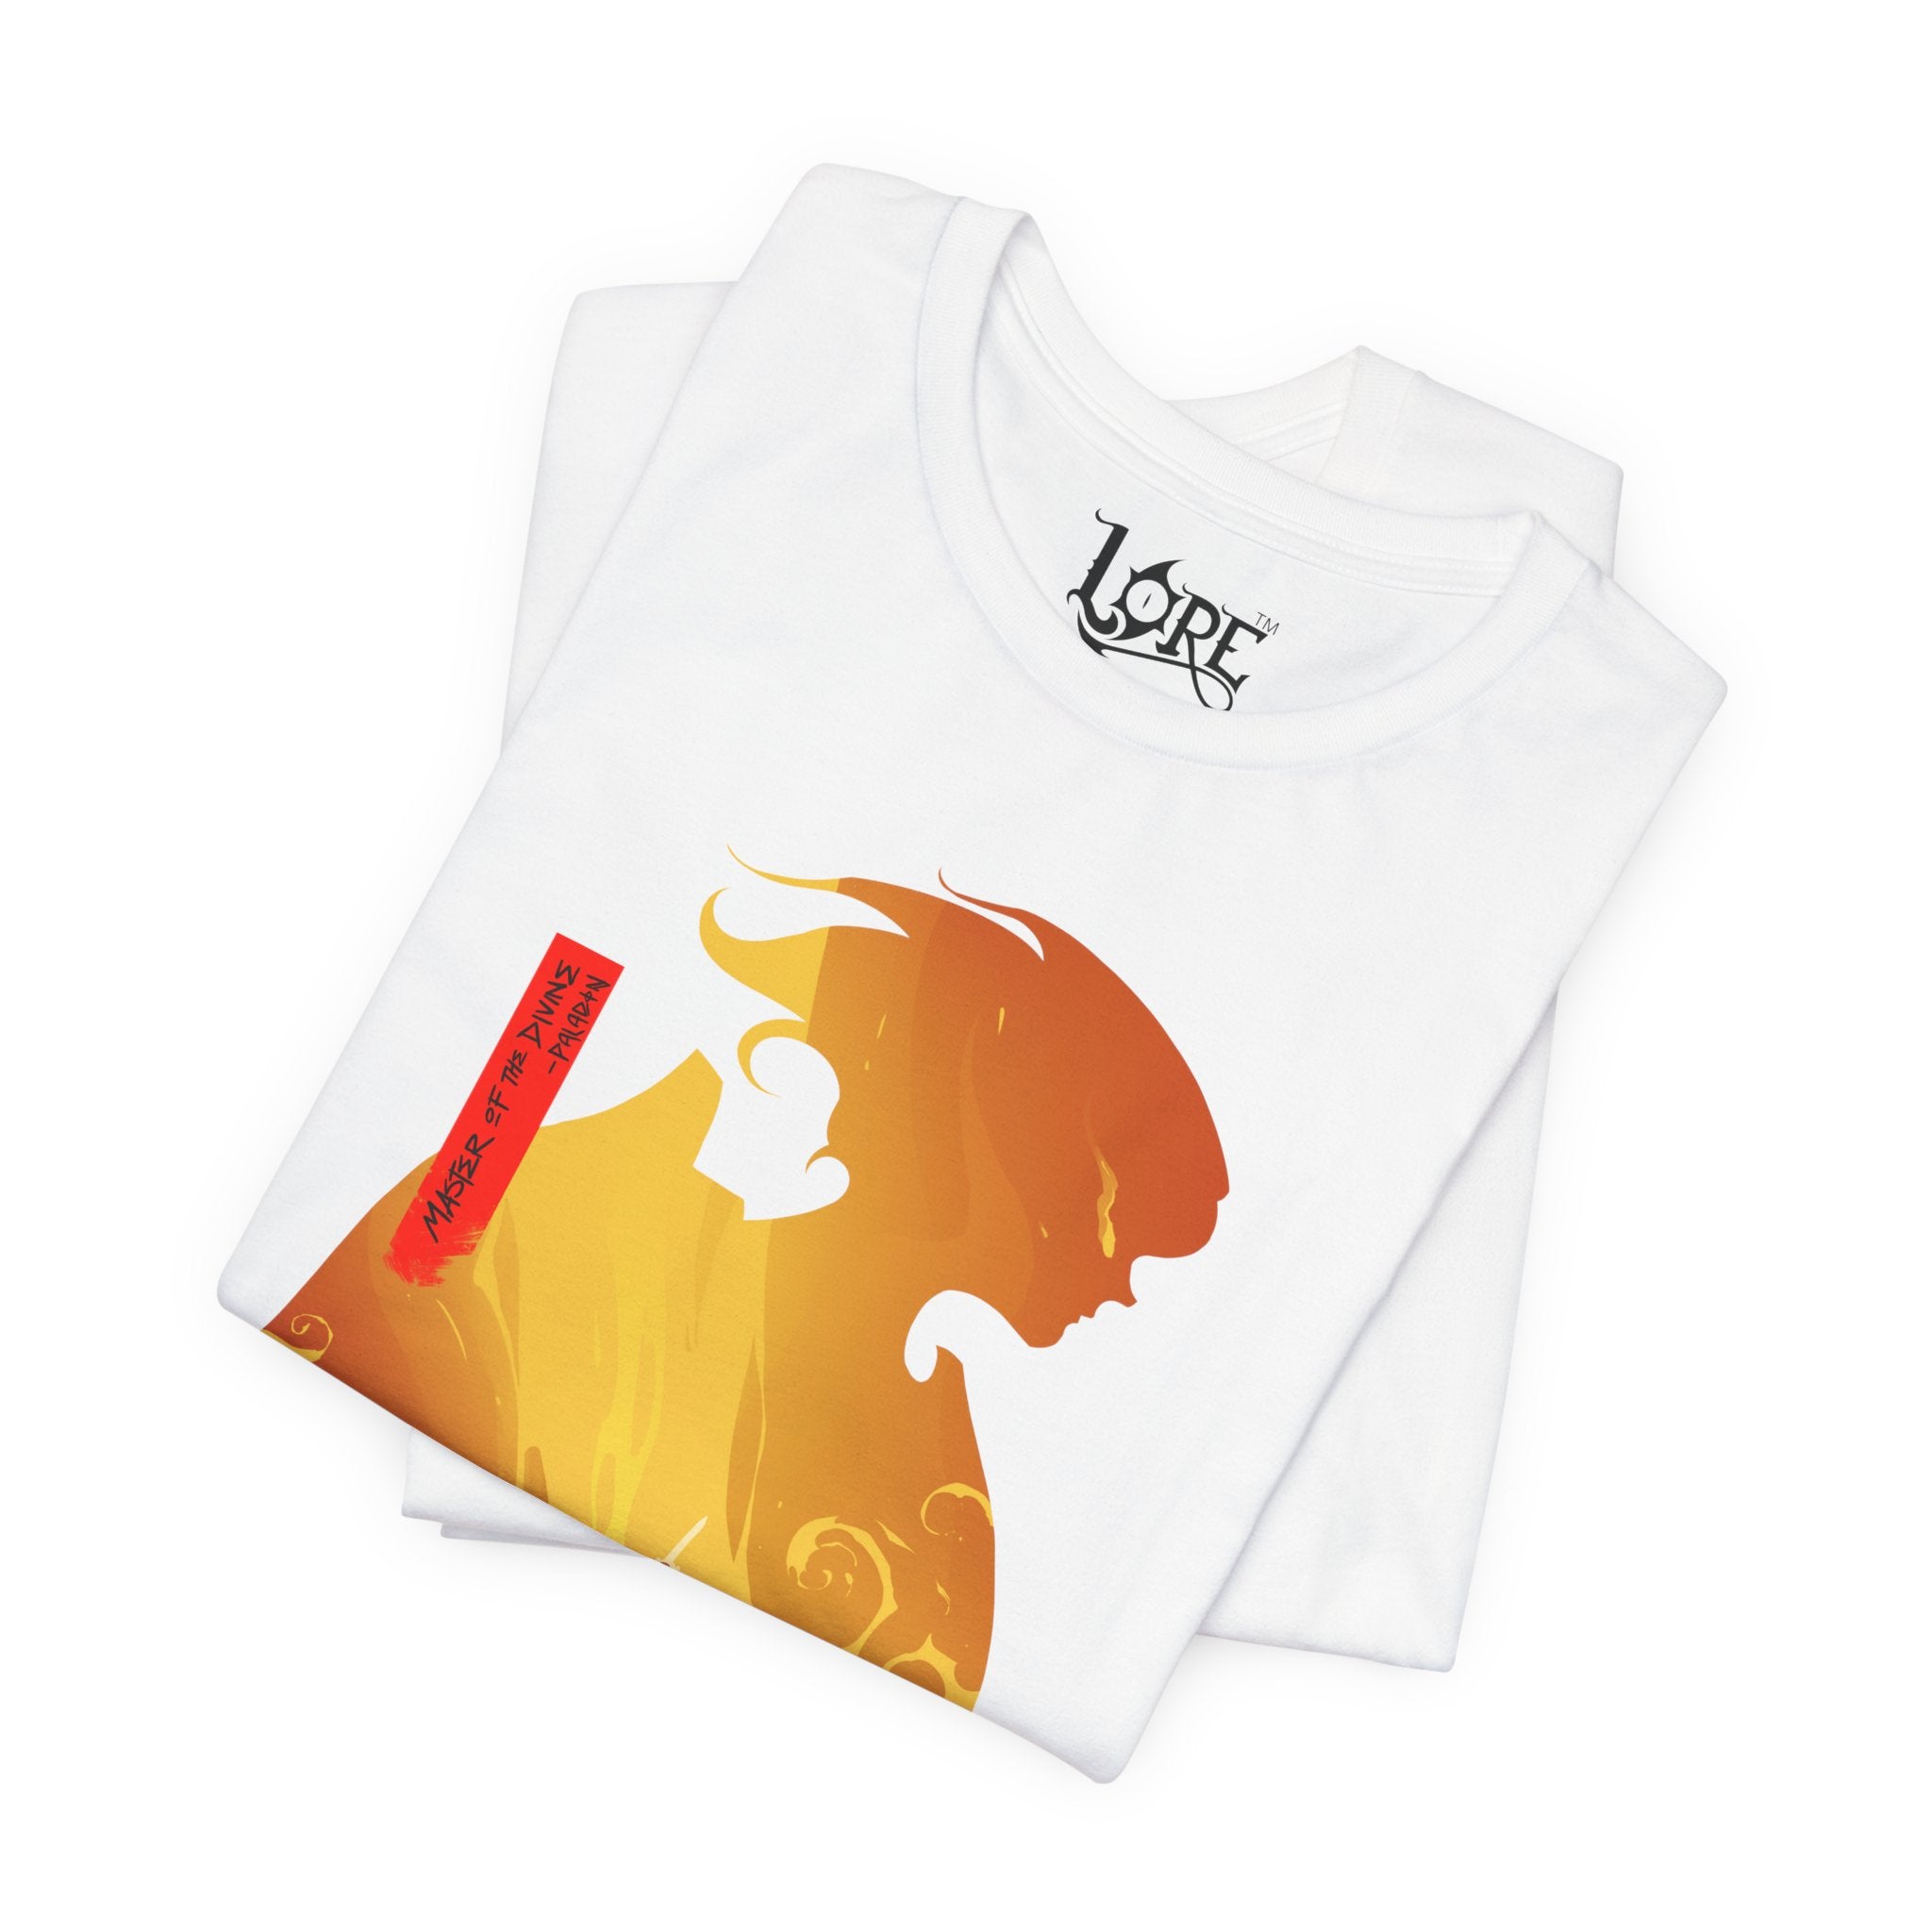 PALADIN CLASS SILHOUETTE T-SHIRT - RED BANNER EDITION